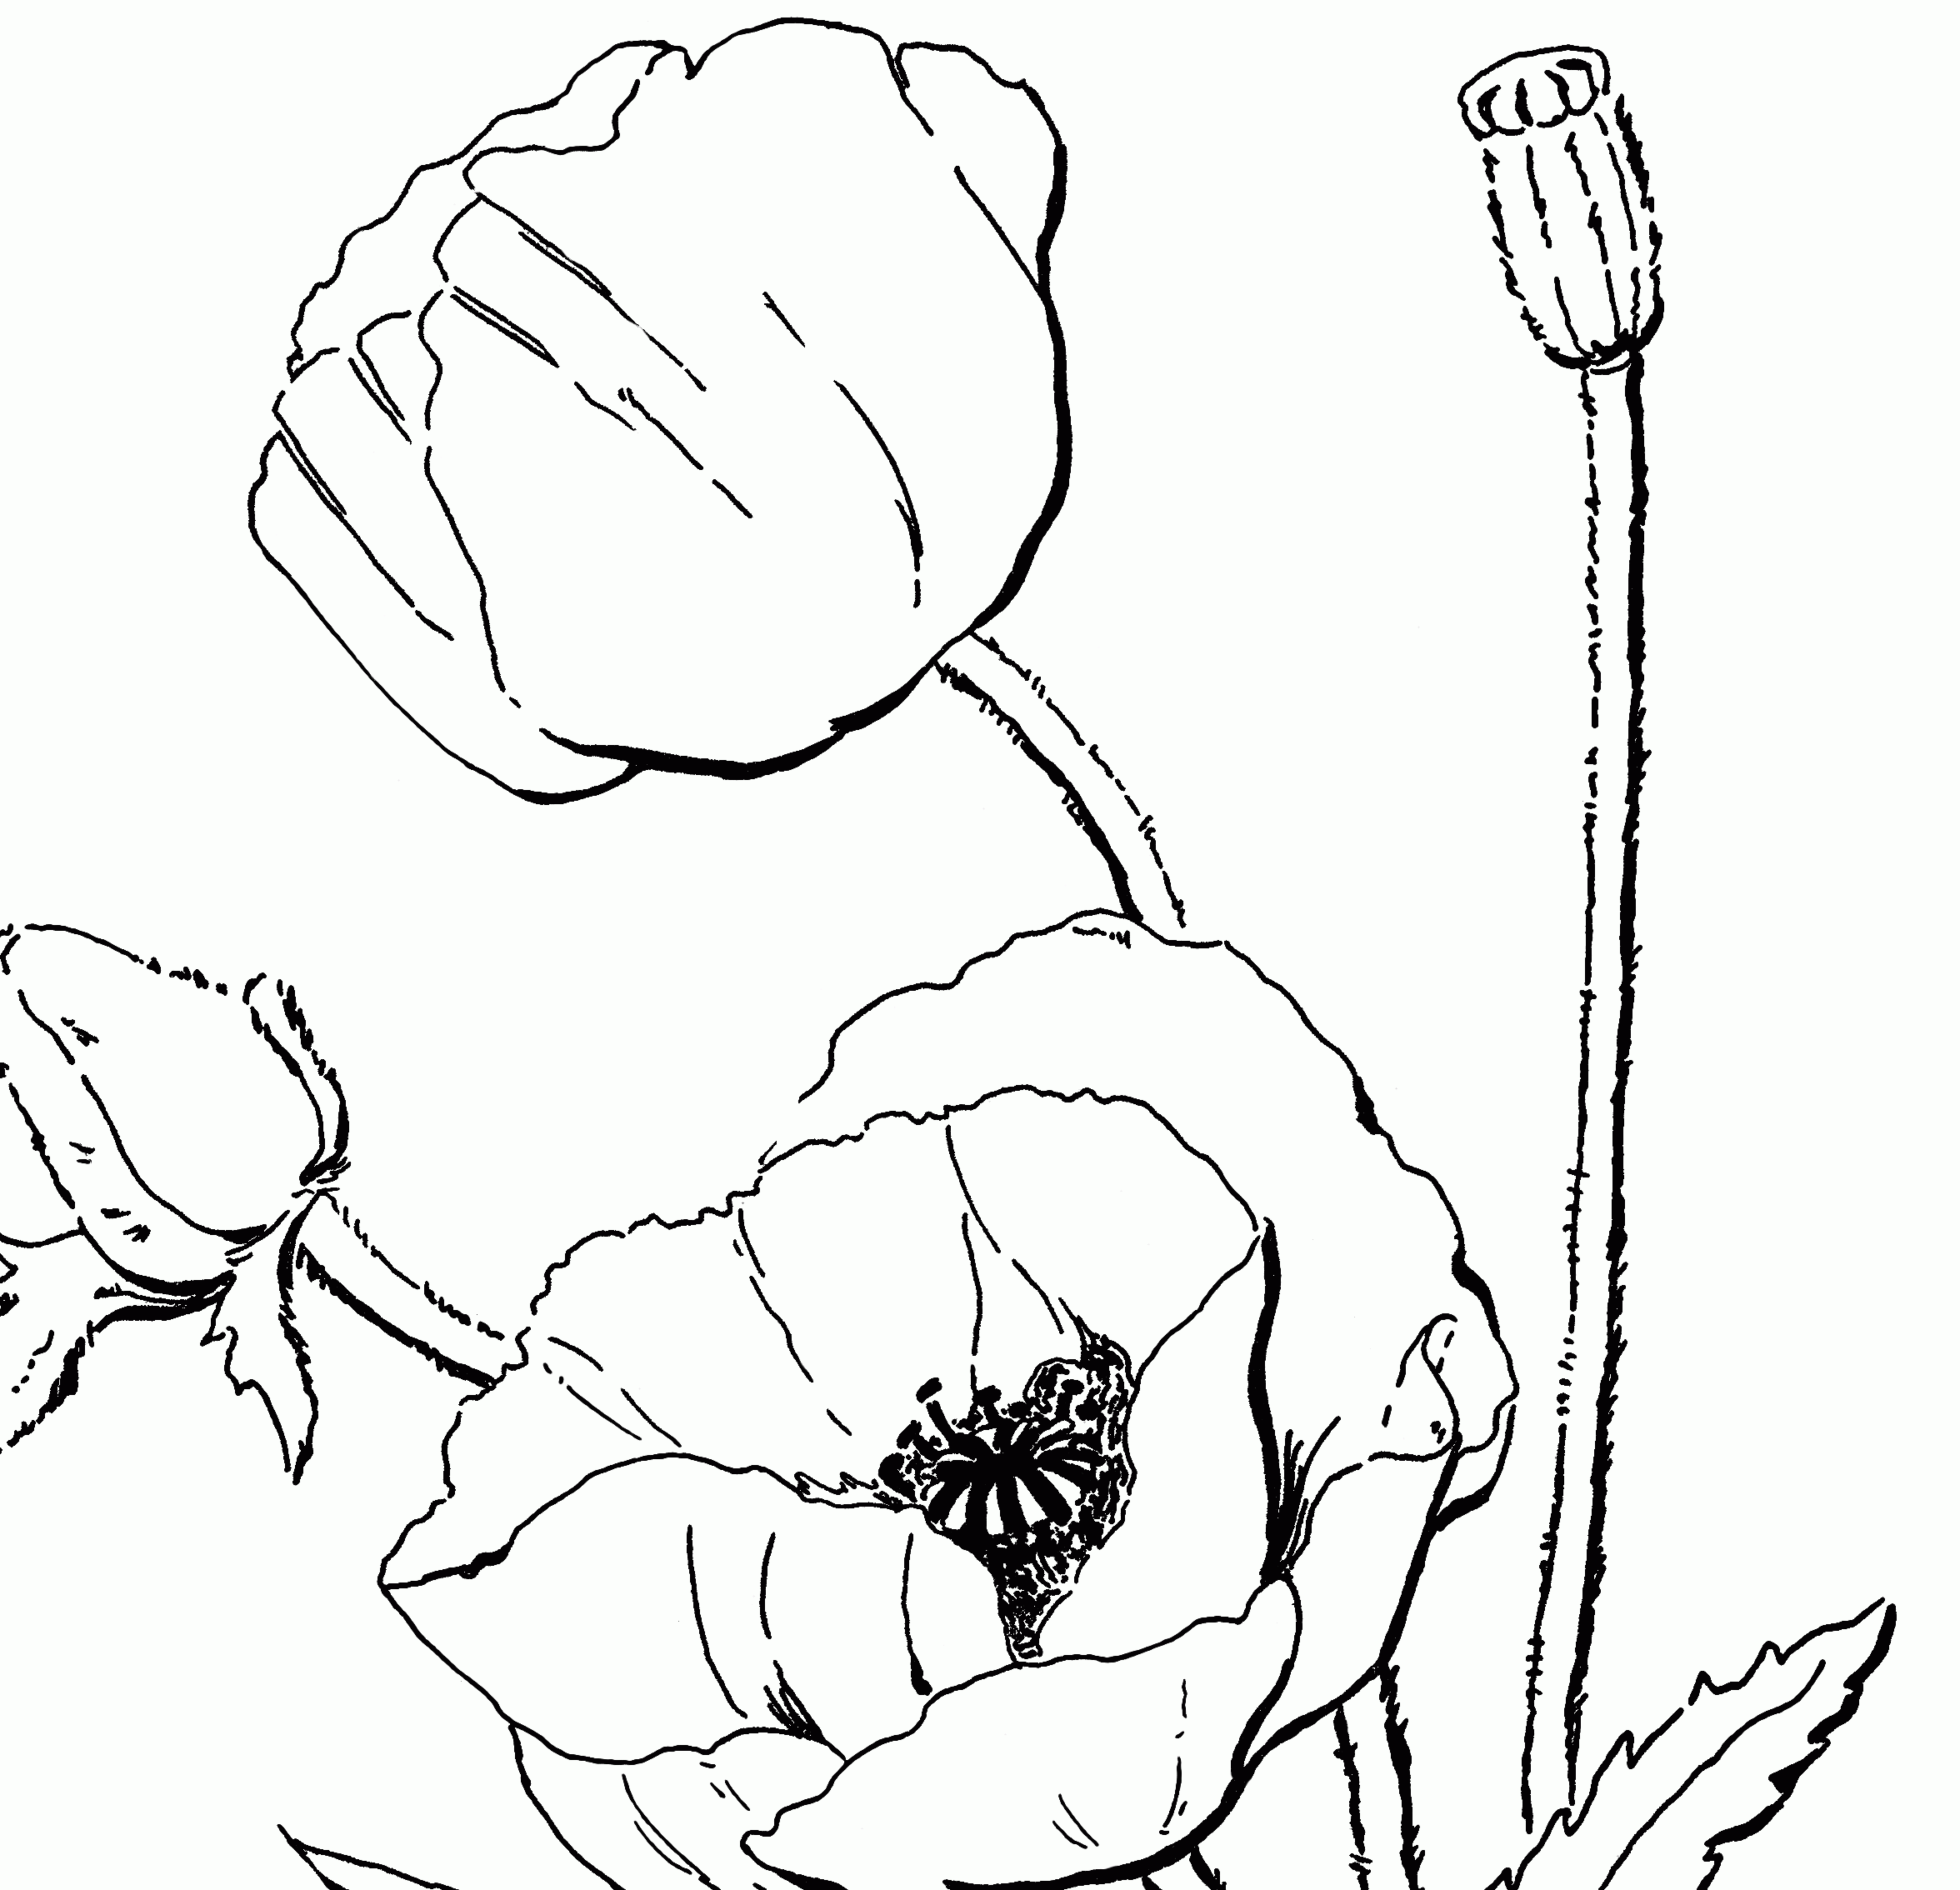 Poppy Coloring Page for Adults! - The Graphics Fairy